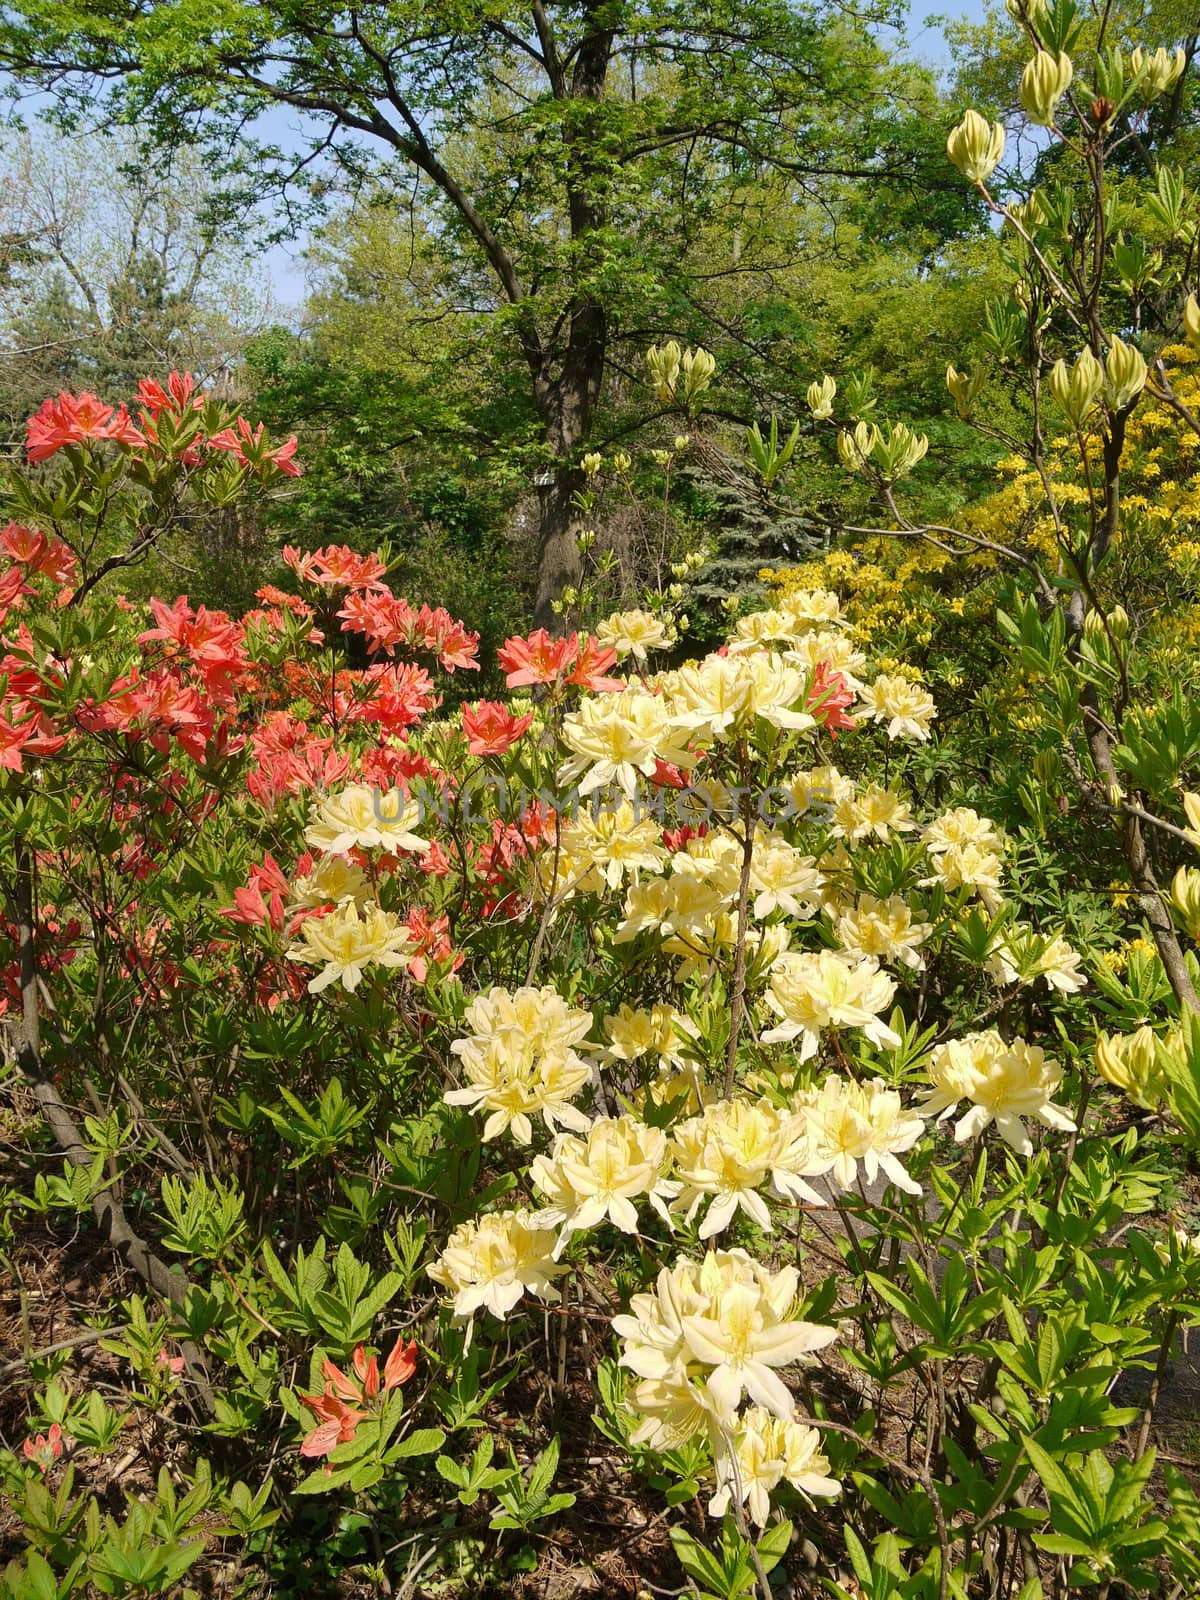 Shrubs with small red and yellow petals of flowers against the background of tall green trees